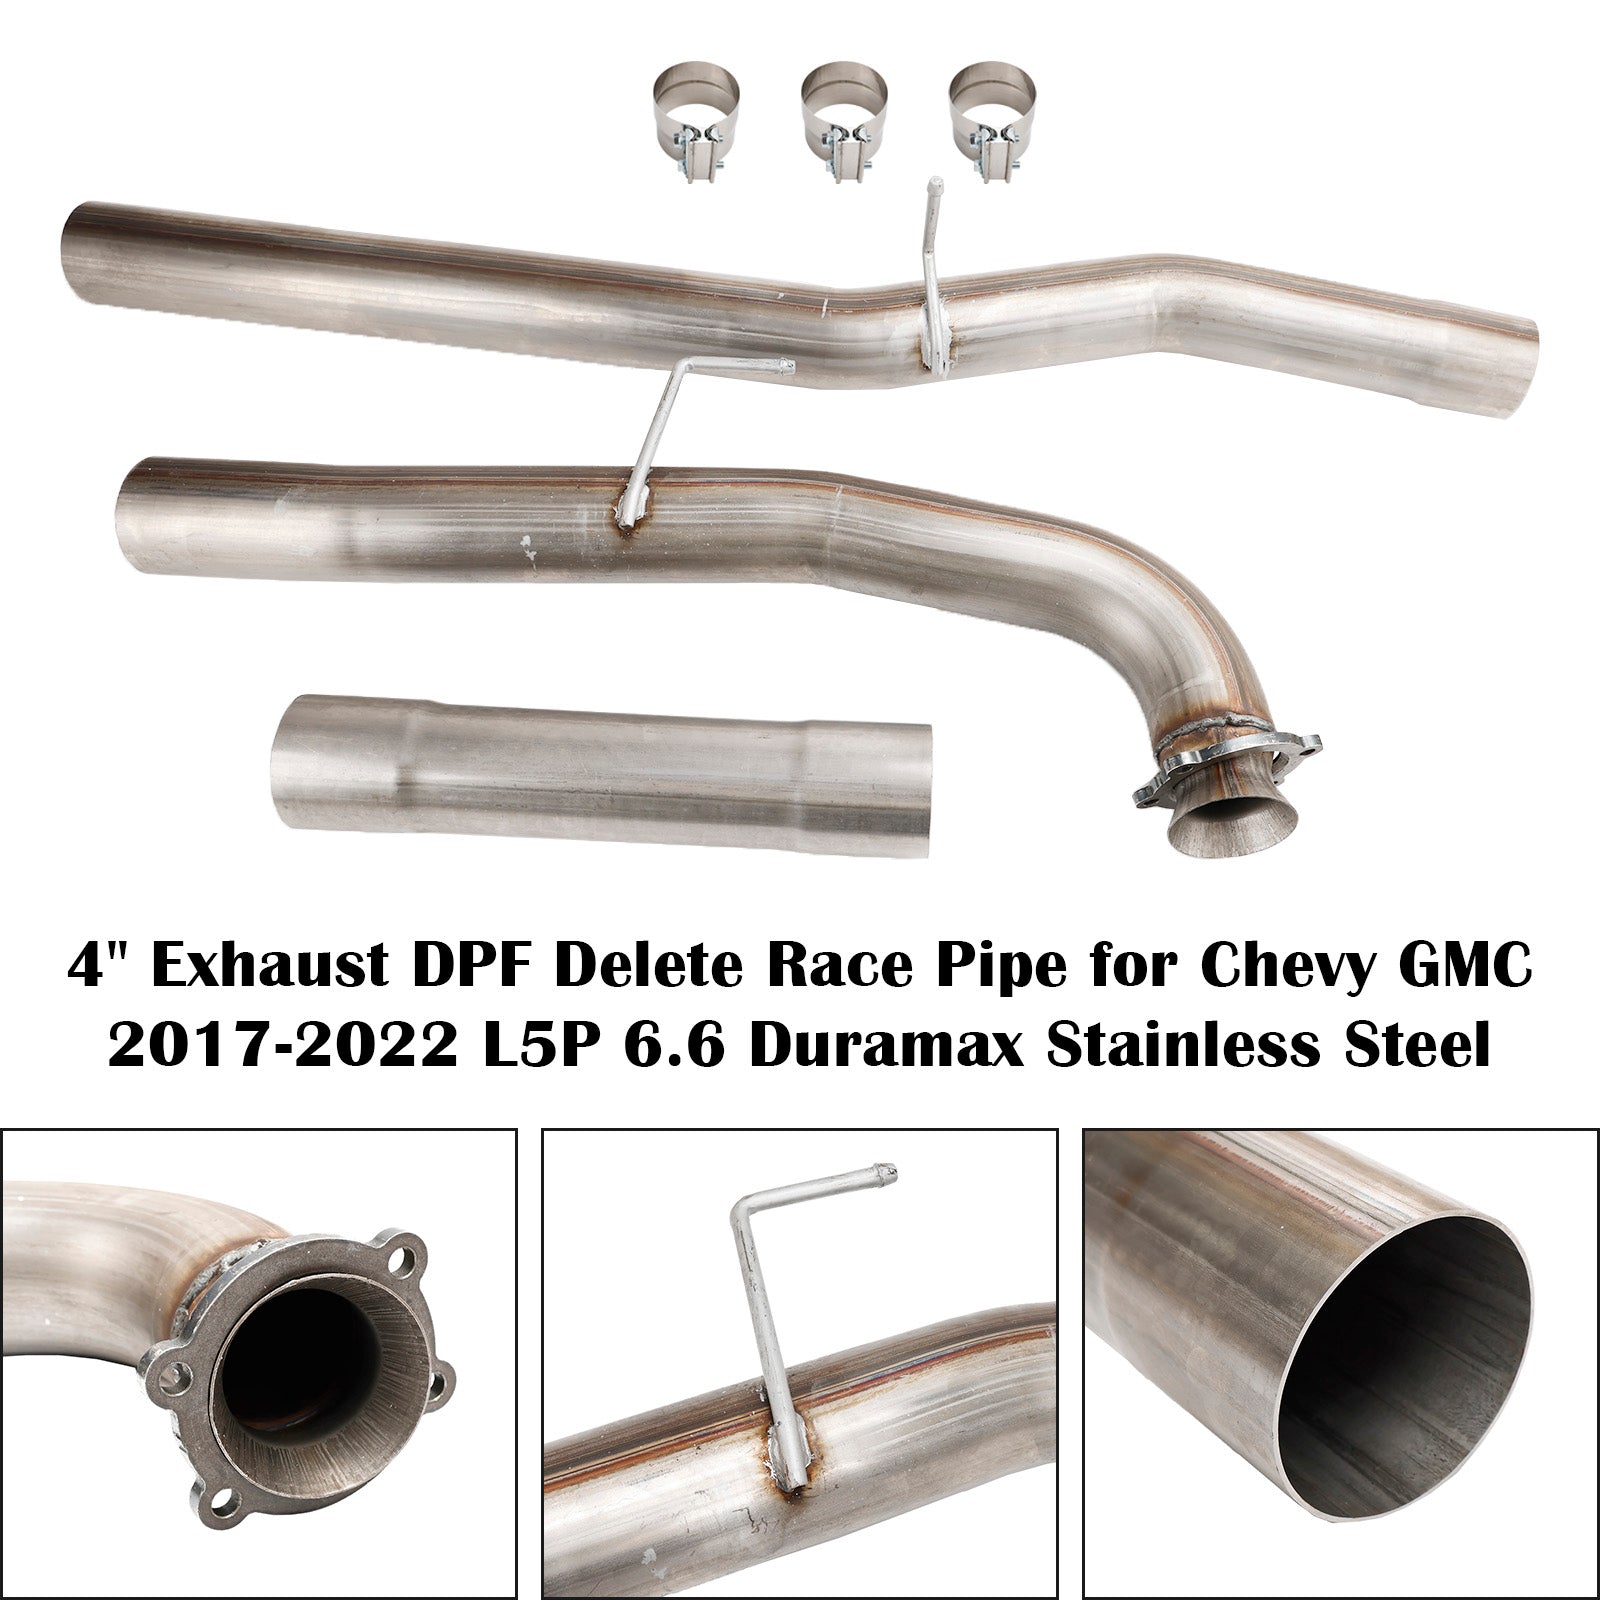 Chevrolet GMC 2017-2022 L5P 6.6 Duramax Stainless Steel 4" Exhaust DPF Delete Race Pipe - 0